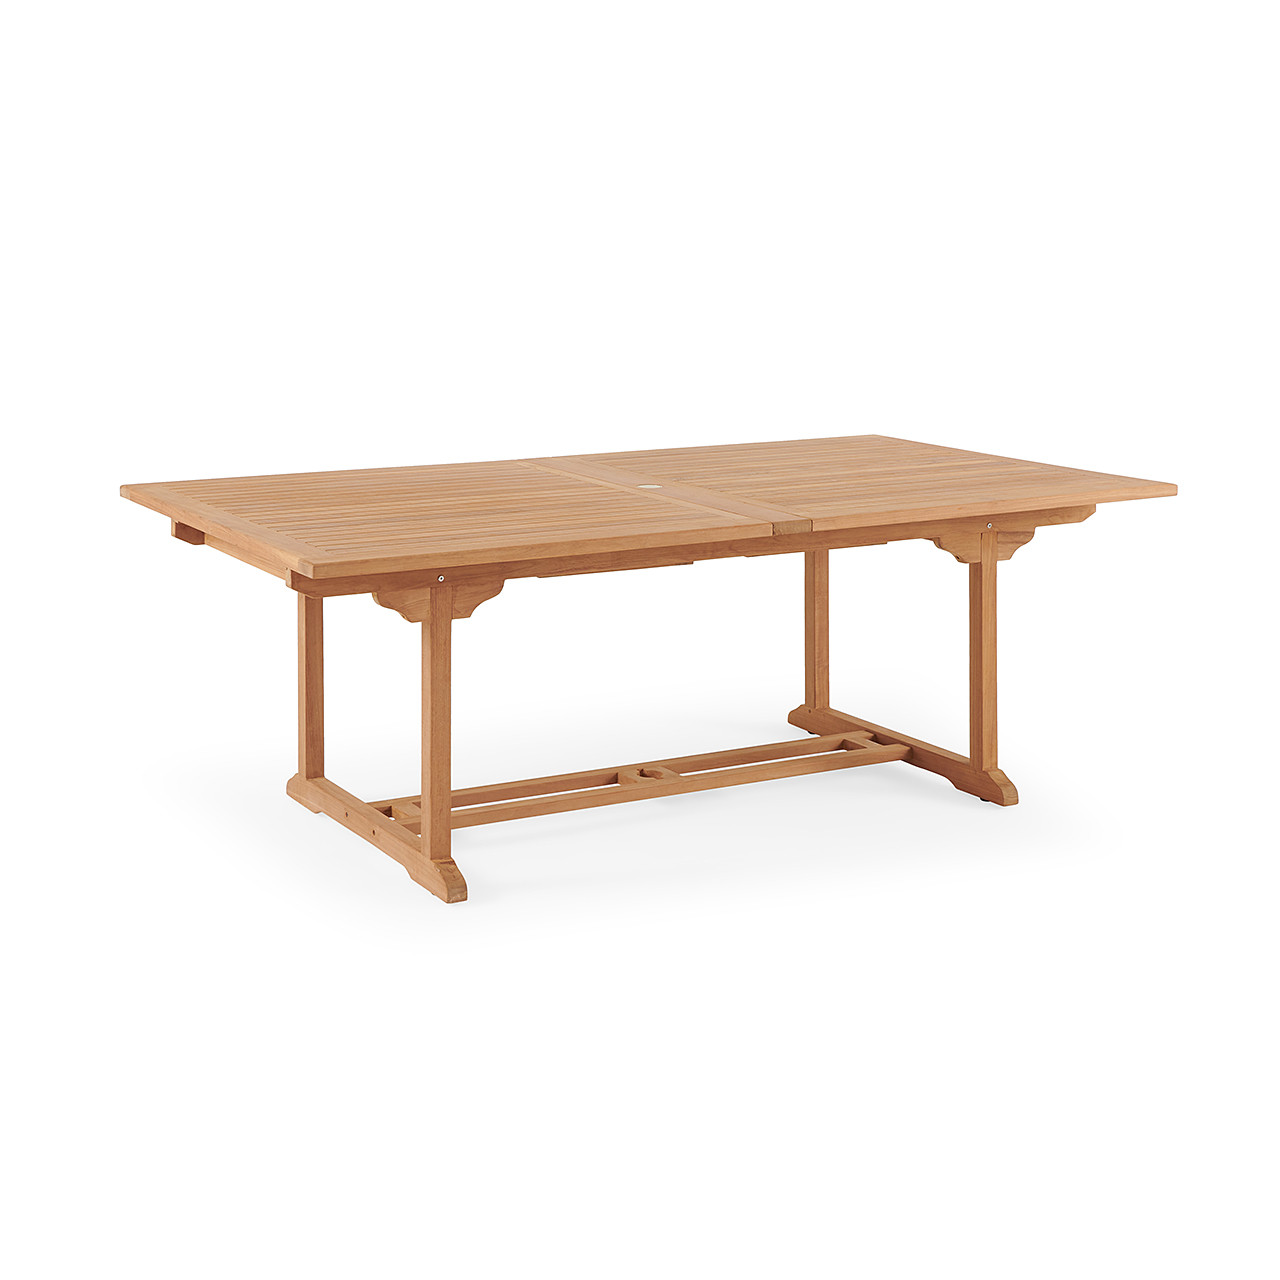 Bristol Teak 87-118 x 47 in. Rect. Double Extension Dining Table